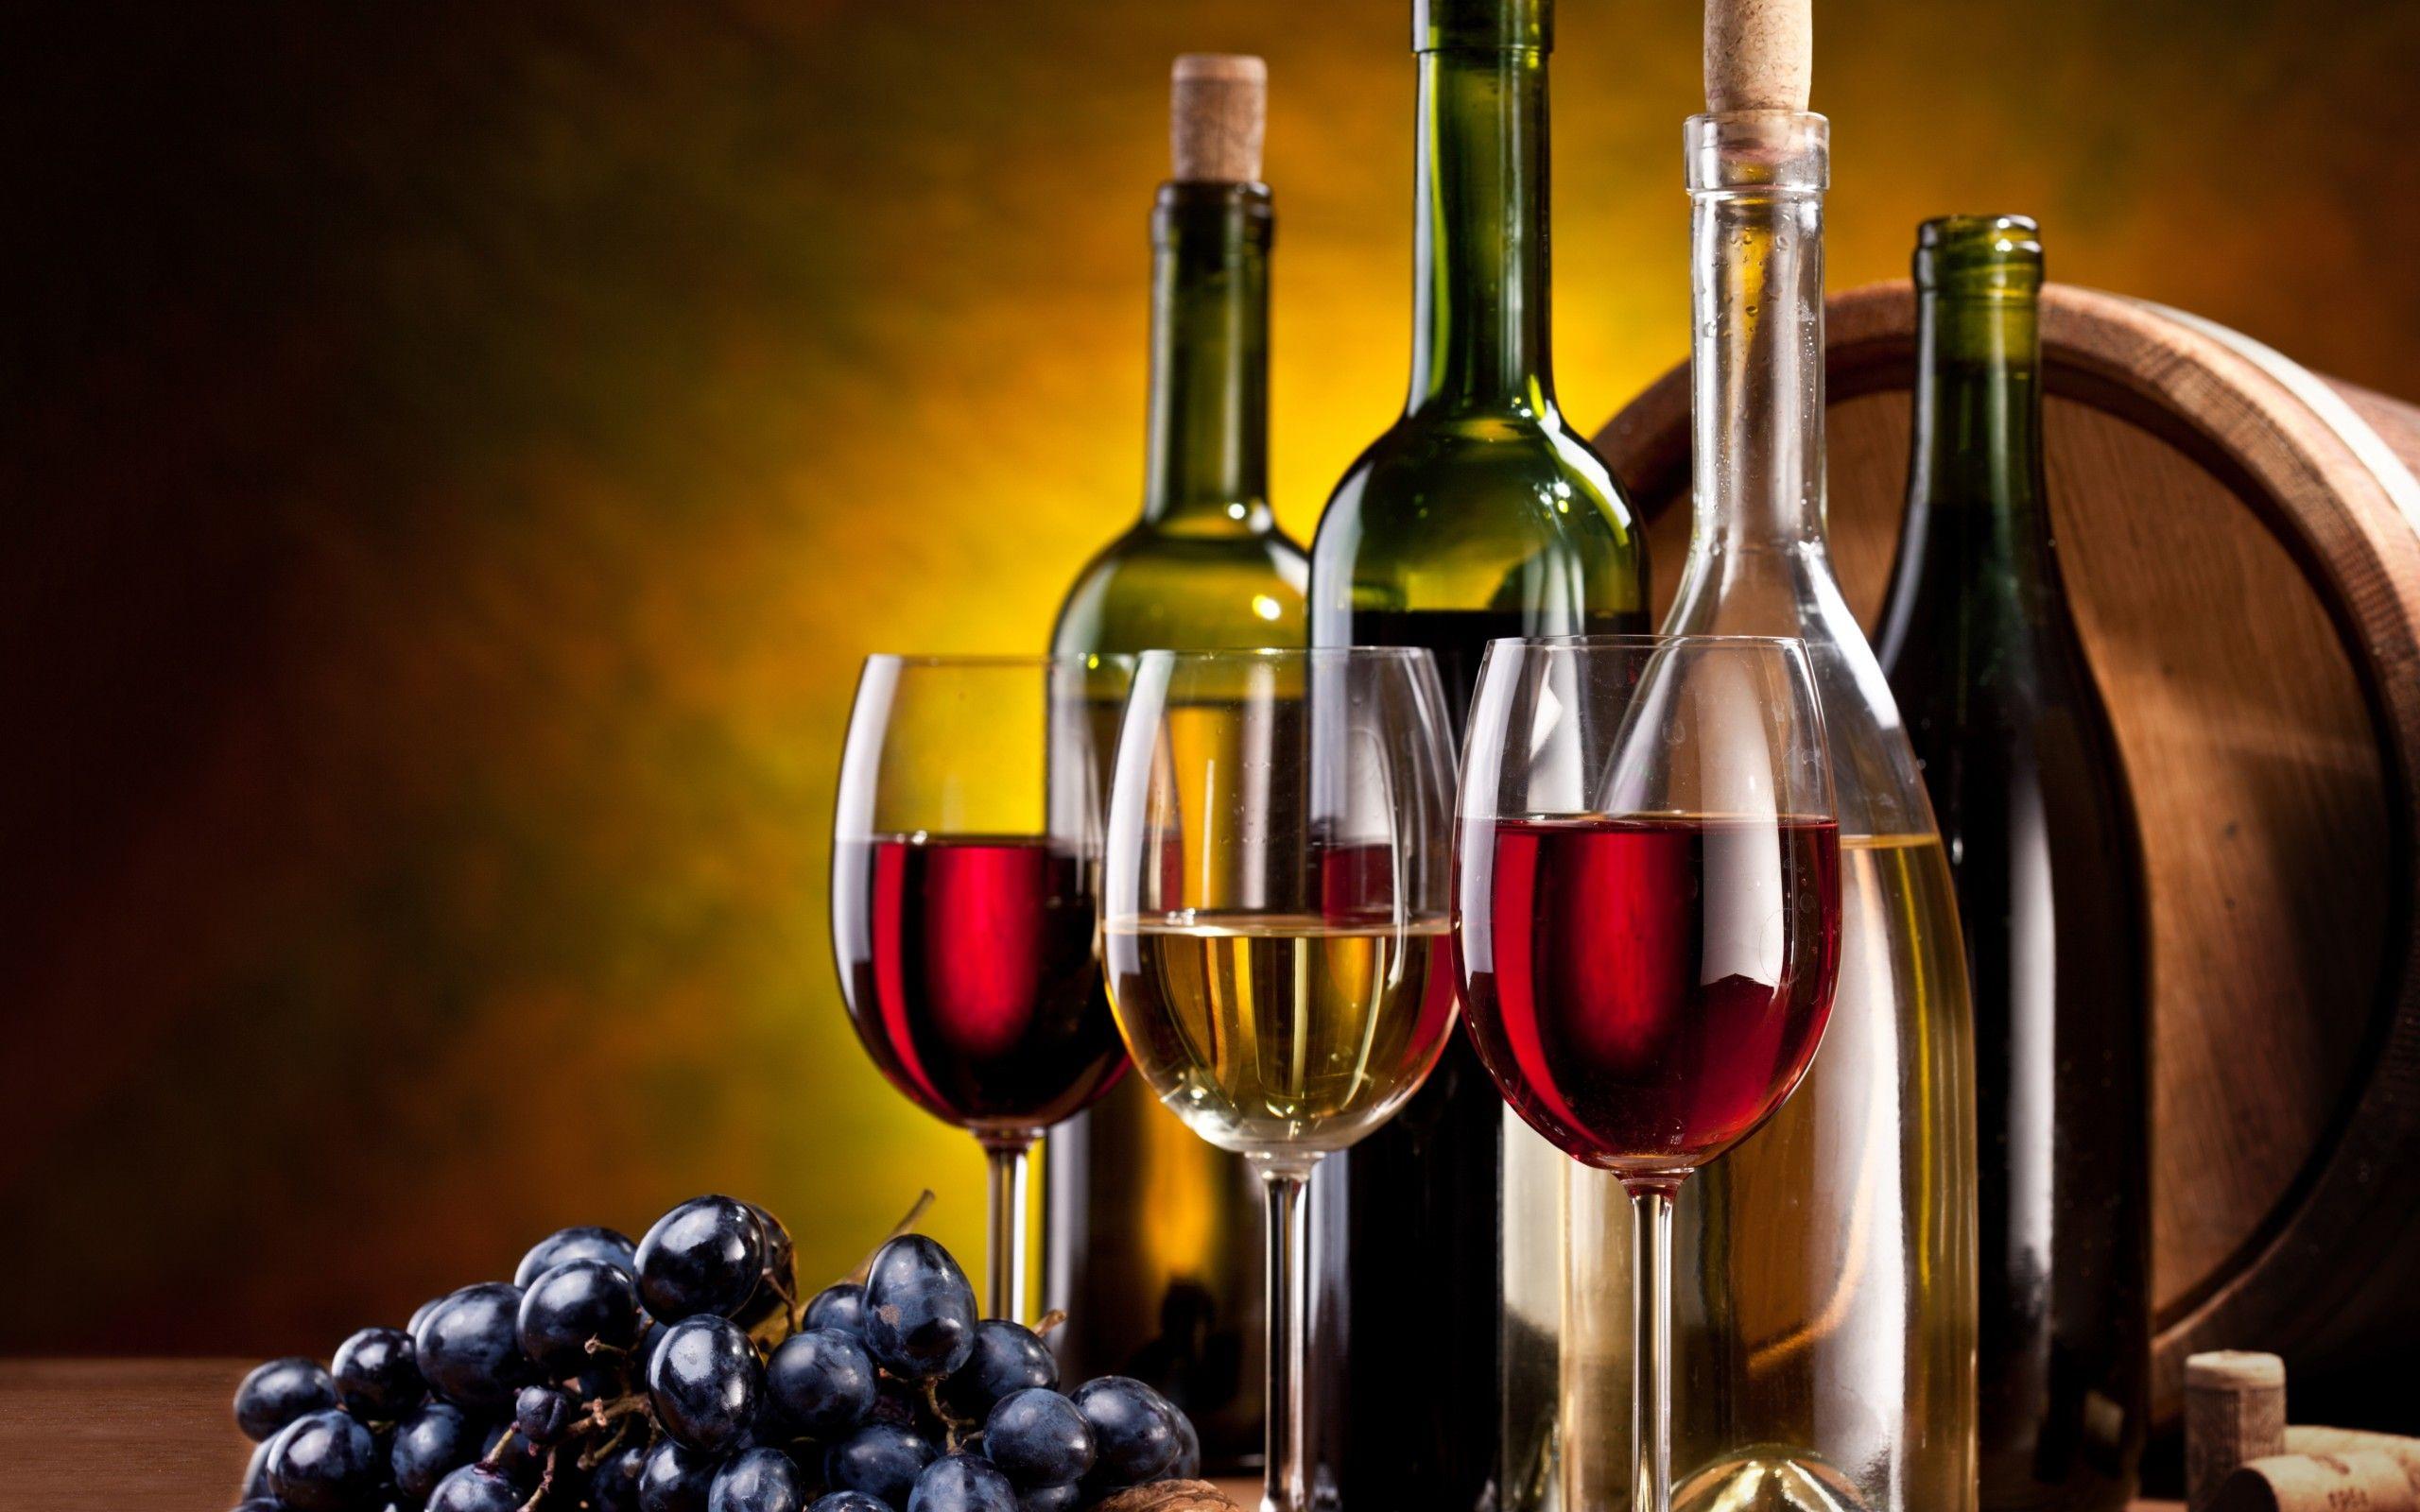 Red Wine Wallpaper (67+ images)